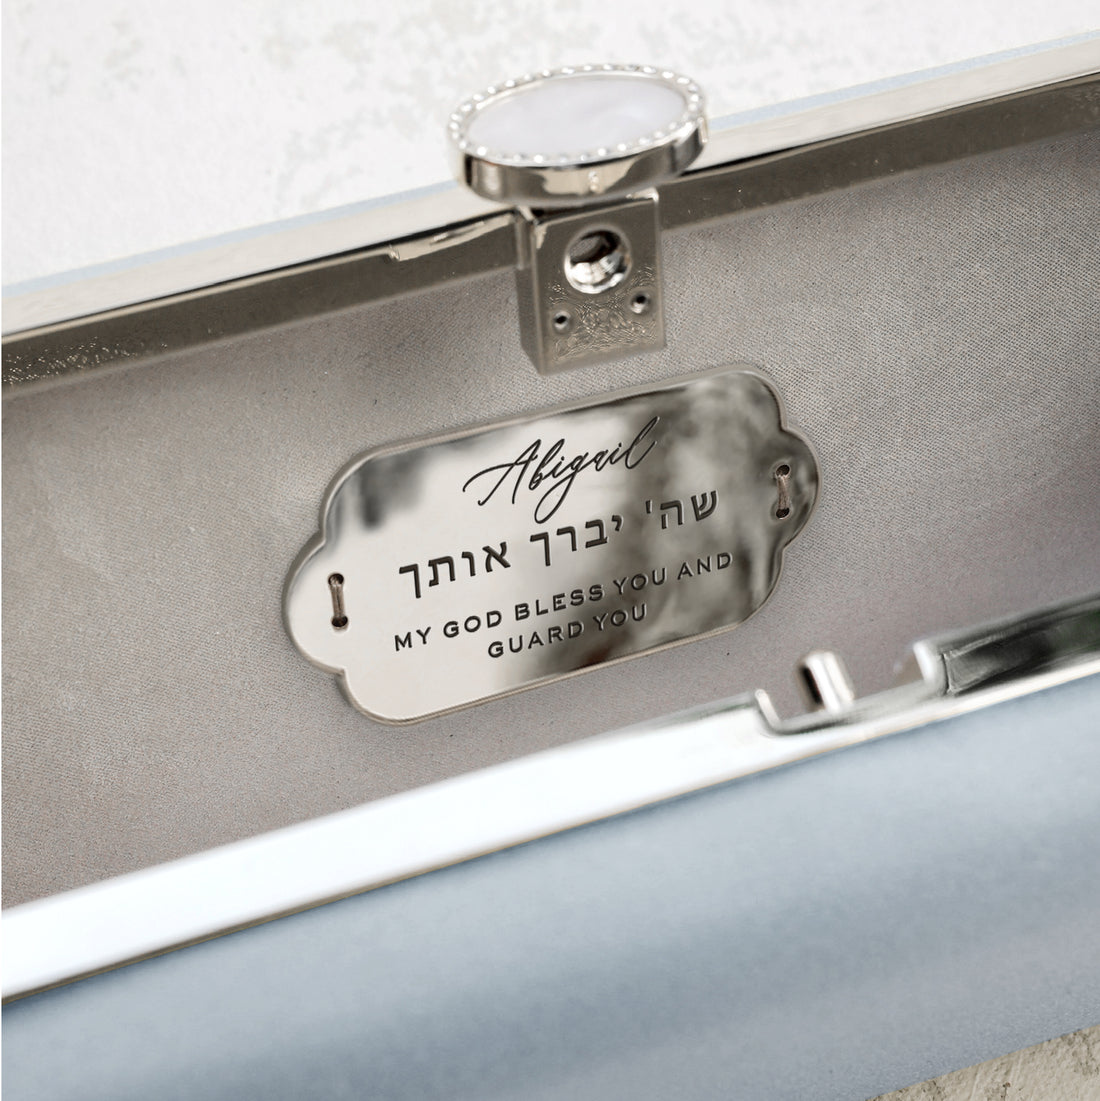 A personalized gift for a Bat Mitzvah, the Bat Mitzvah Personalized Bella Clutch Petite from The Bella Rosa Collection is a blue box with a Hebrew name on it.